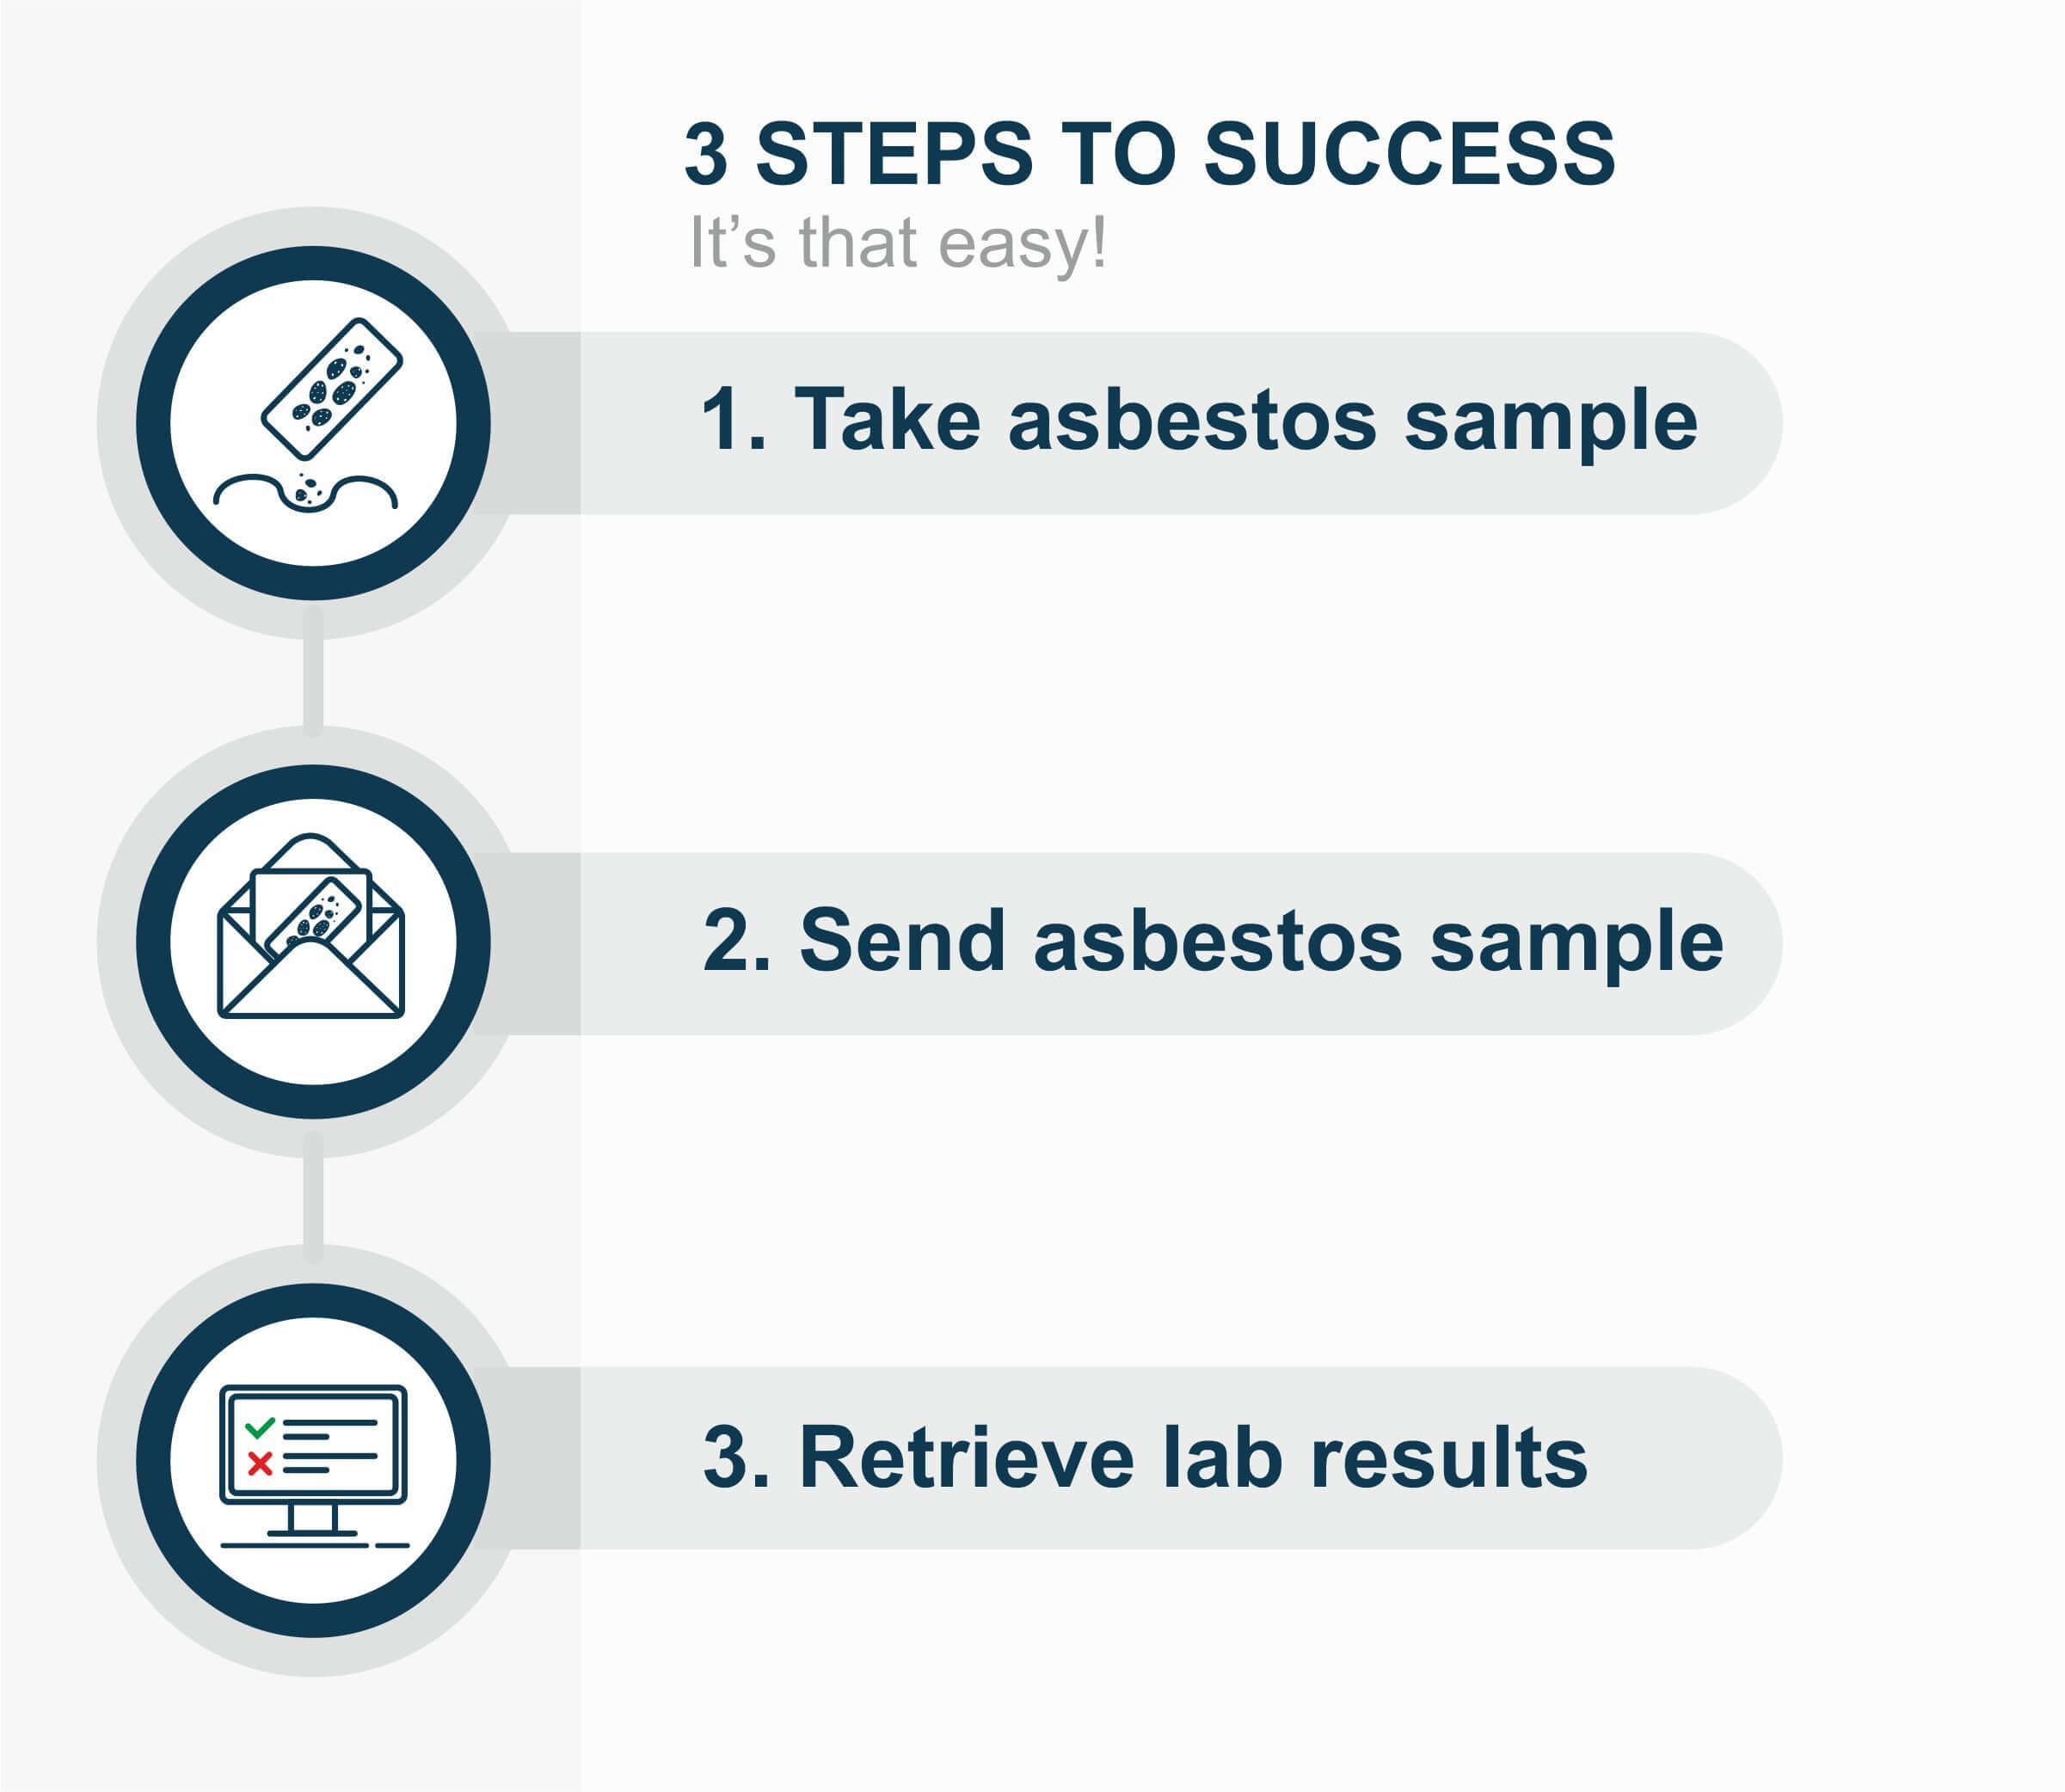 Three easy steps are needed to complete the Asbestos test